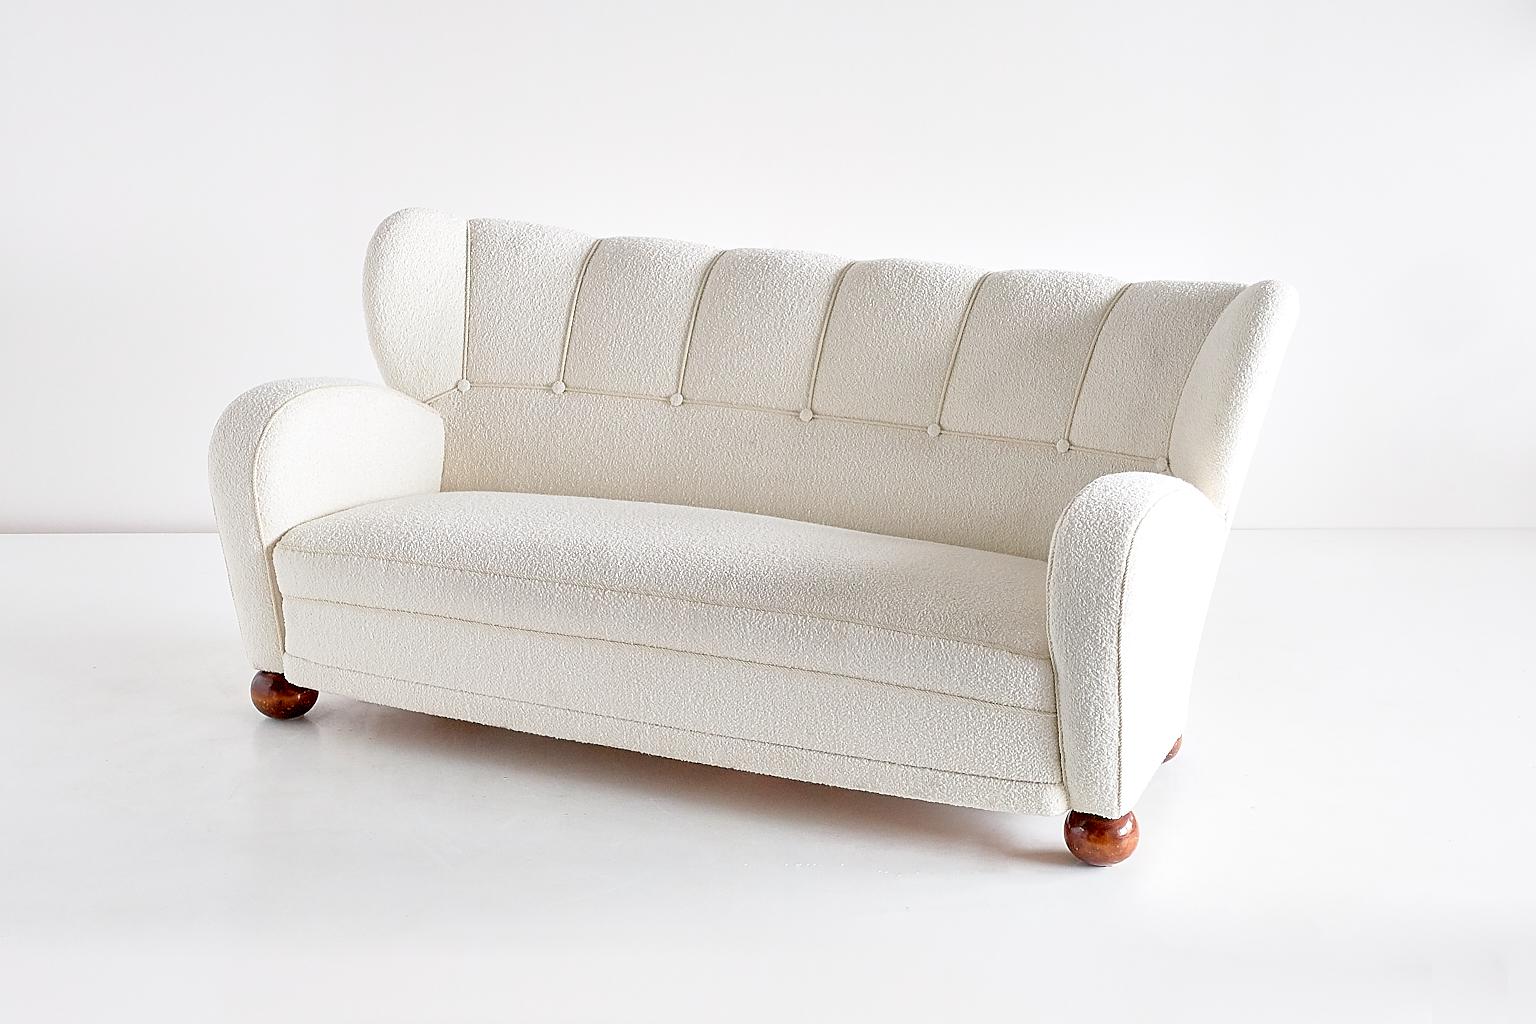 Märta Blomstedt Sofa, Finland, 1940s In Good Condition For Sale In The Hague, NL